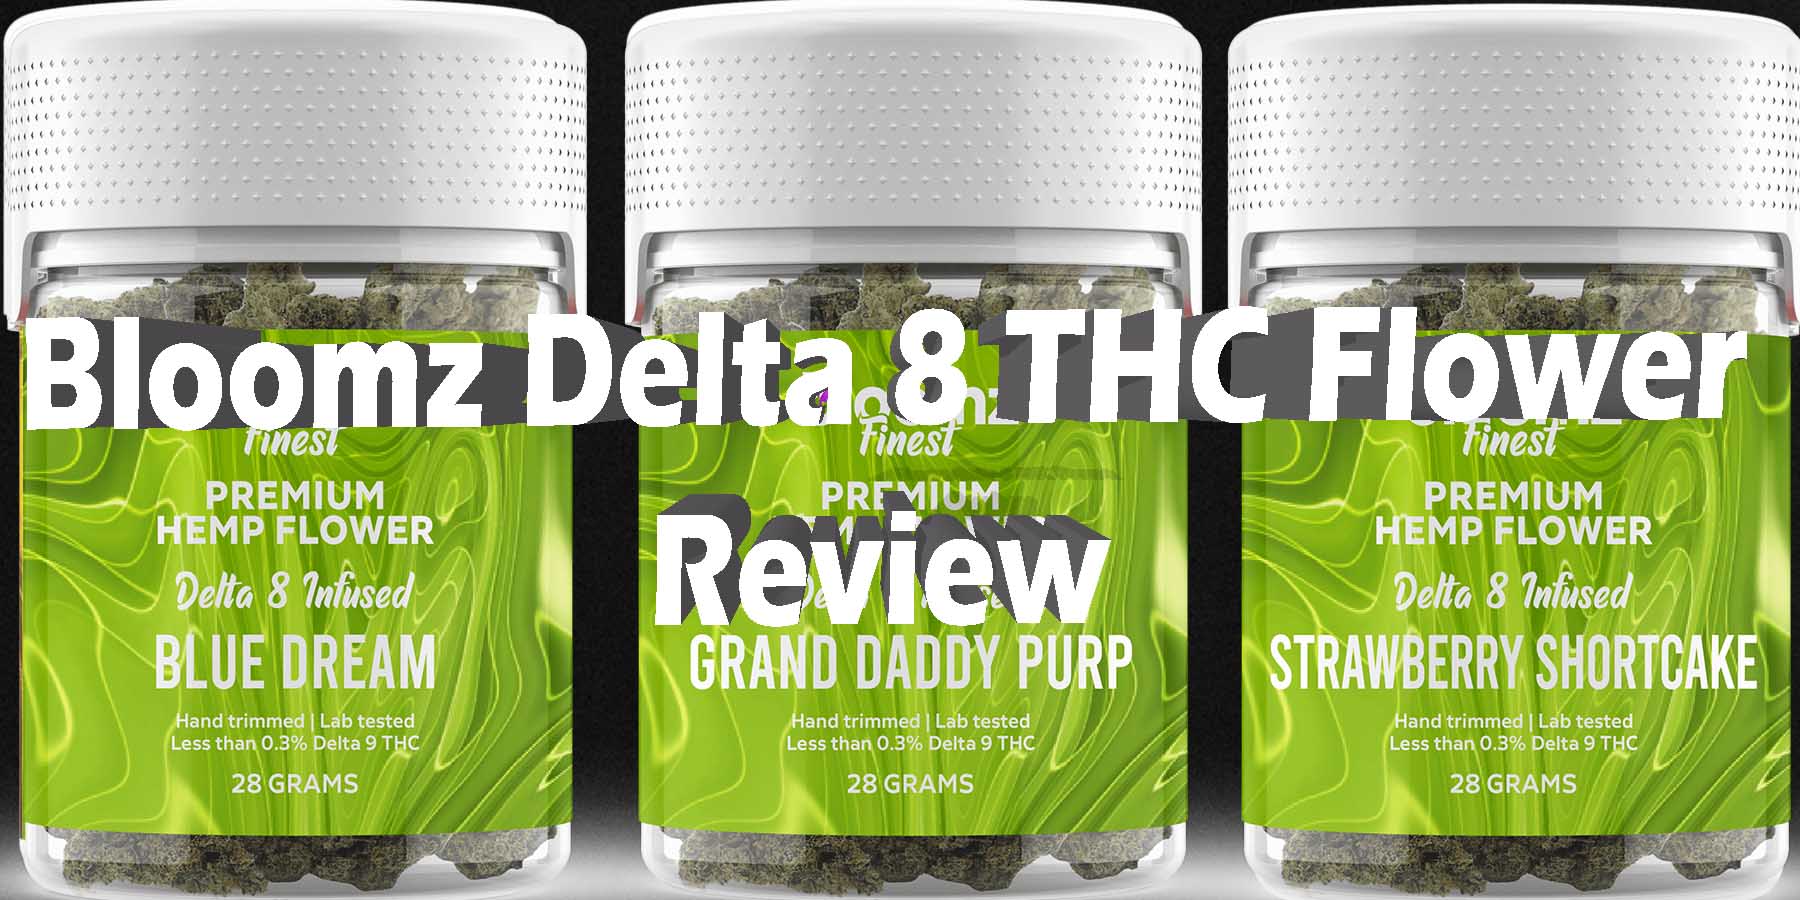 Bloomz Delta 8 THC Flower Review WhereToGet HowToGetNearMe BestPlace LowestPrice Coupon Discount For Smoking Best High Smoke Shop Online Near Me Strongest Binoid Bloomz